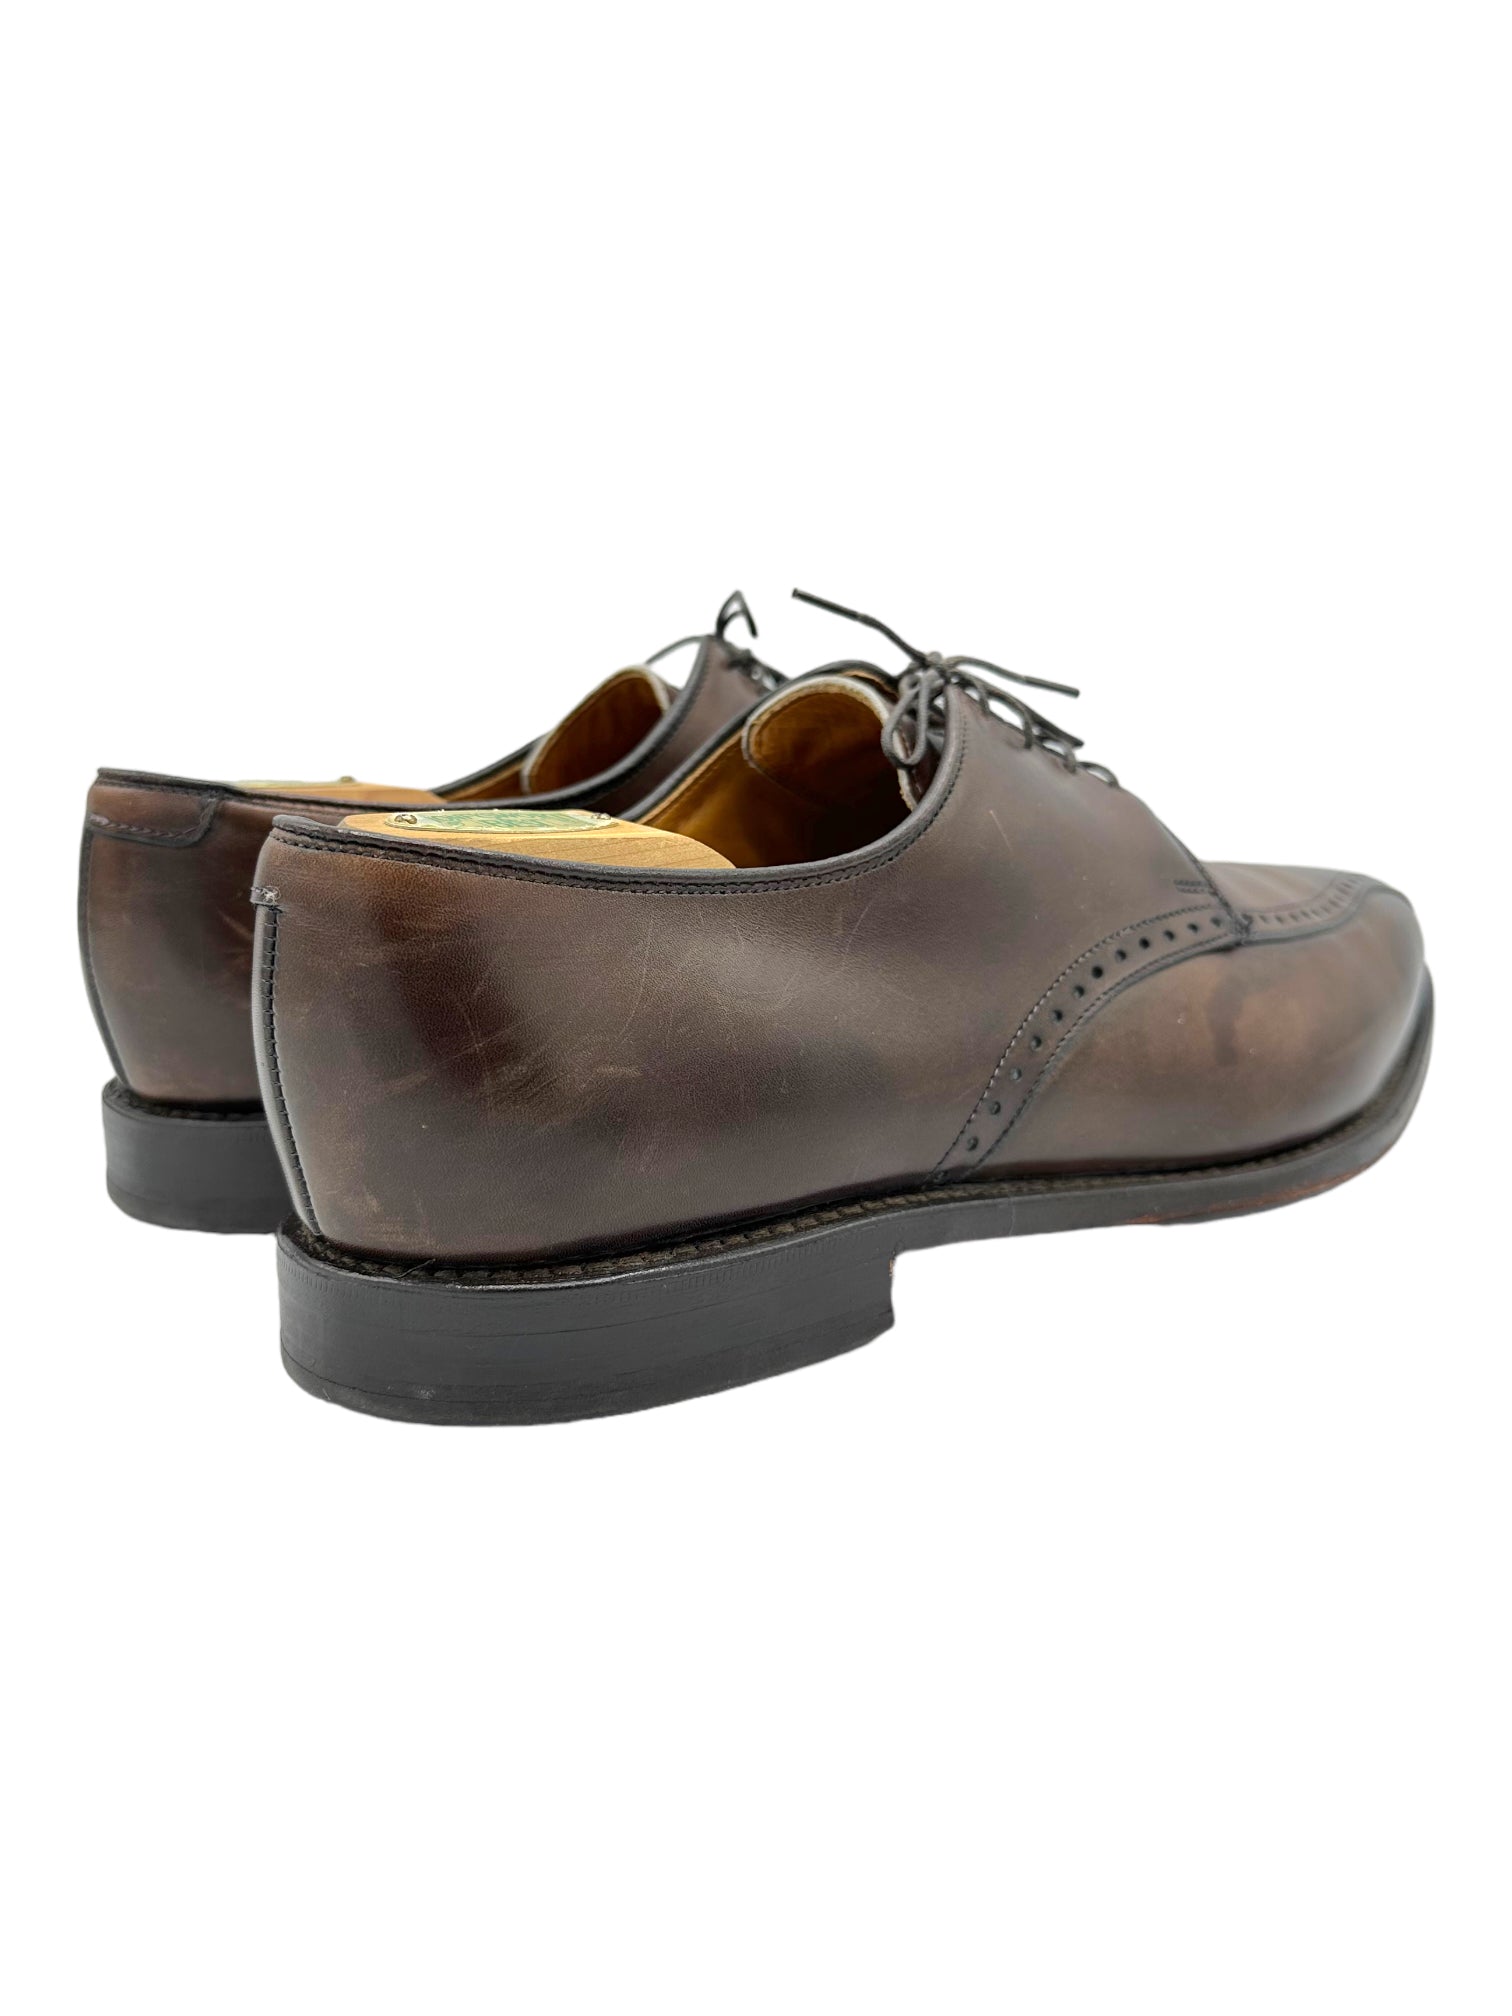 Allen Edmonds Wendell Brown Leather Oxford Dress Shoes - Genuine Design Luxury Consignment for Men. New & Pre-Owned Clothing, Shoes, & Accessories. Calgary, Canada